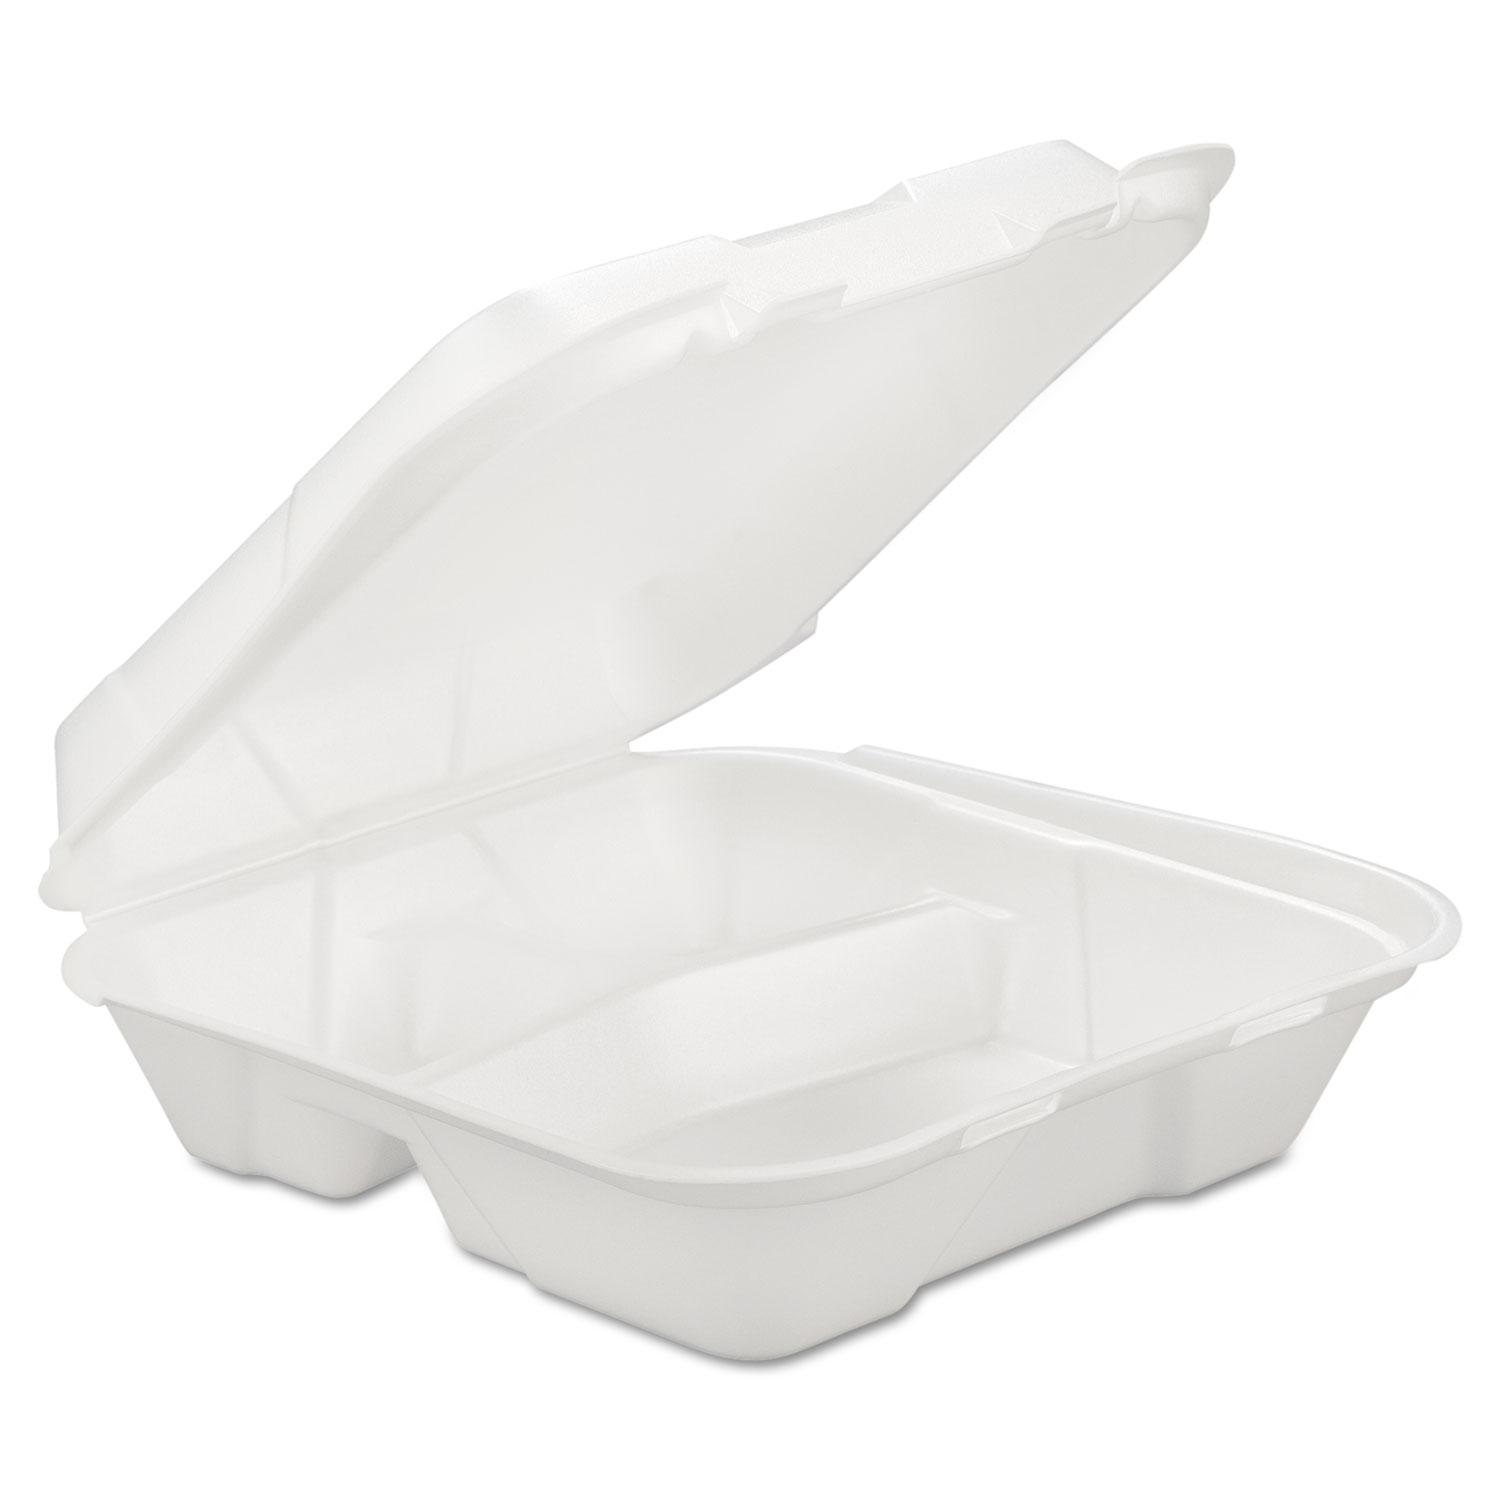 Foam Hinged Carryout Container, 3-Comp, White, 9 1/4 X 9 1/4 X 3, 200/Carton